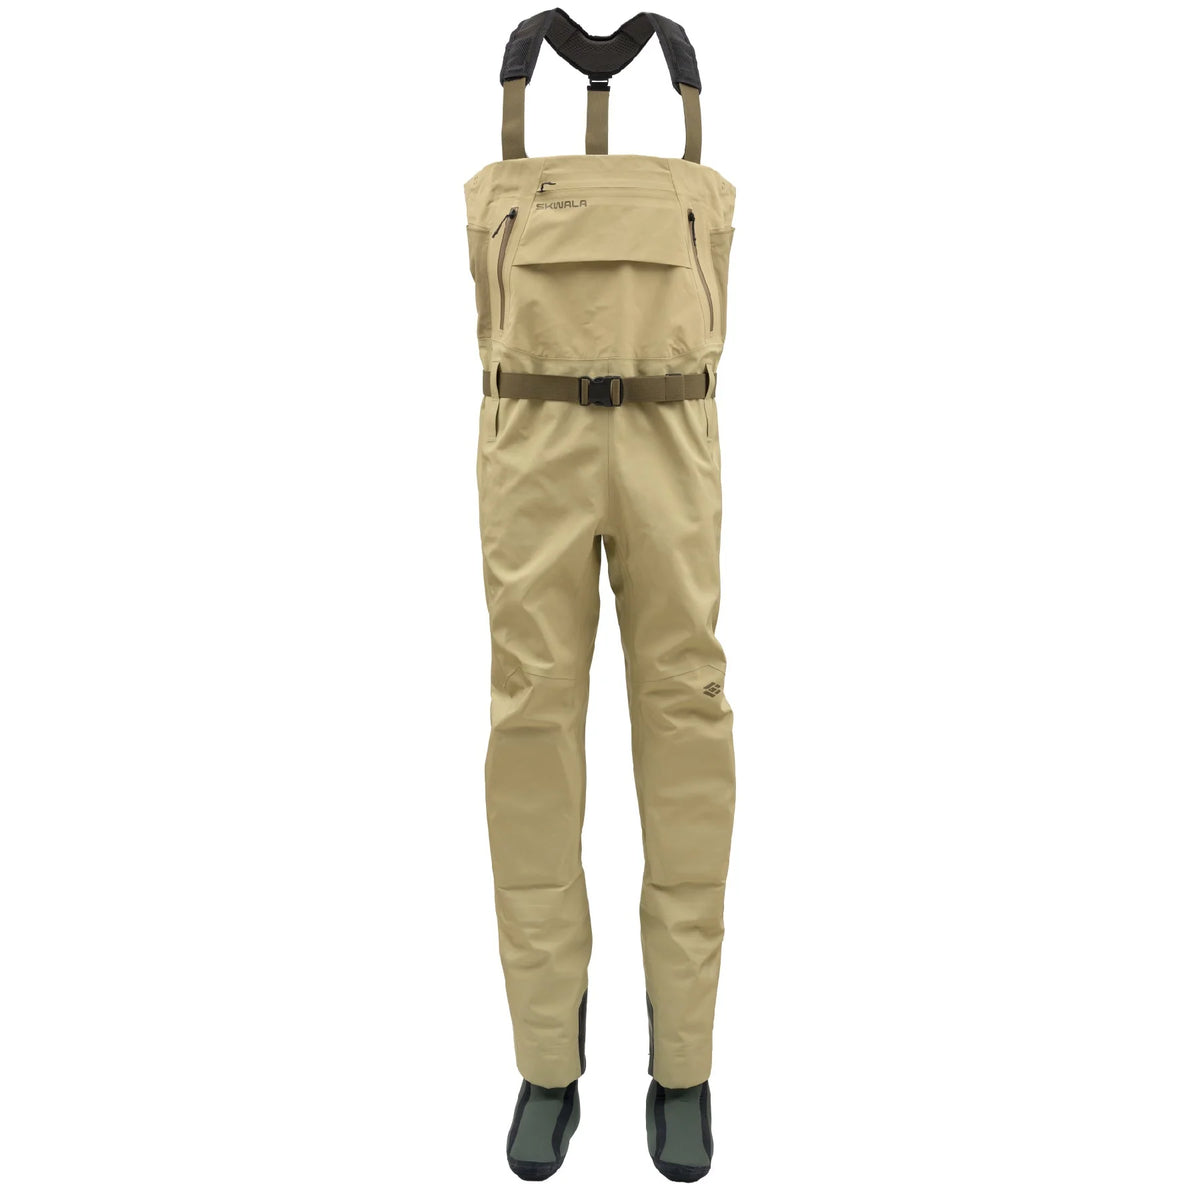 Fishing Waders for Men for sale in Baltimore, Maryland